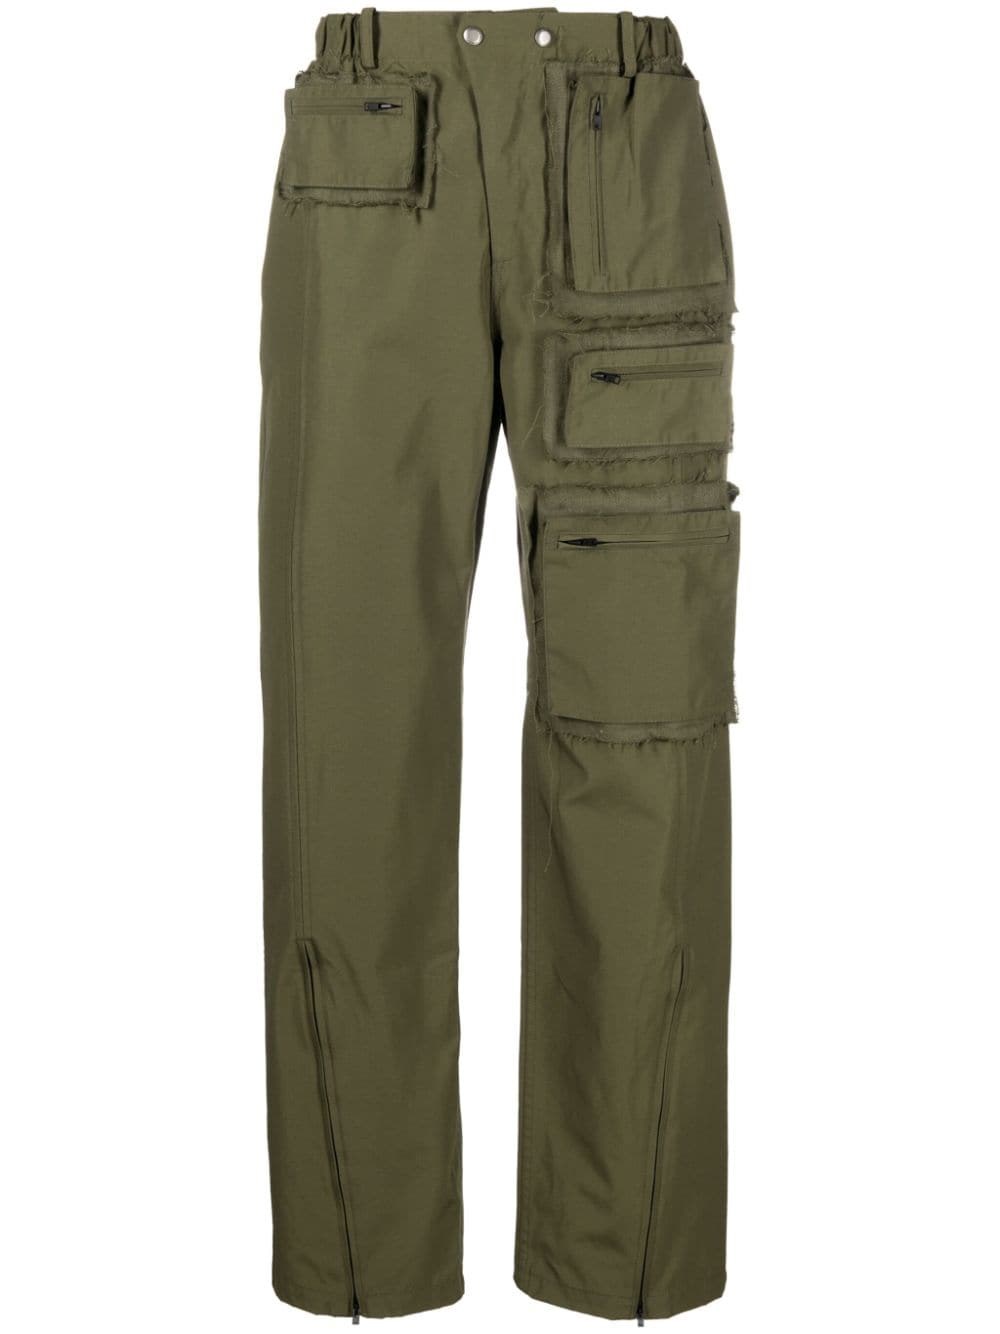 ANDERSSON BELL RAW EDGE MULTI-POCKET PANTS